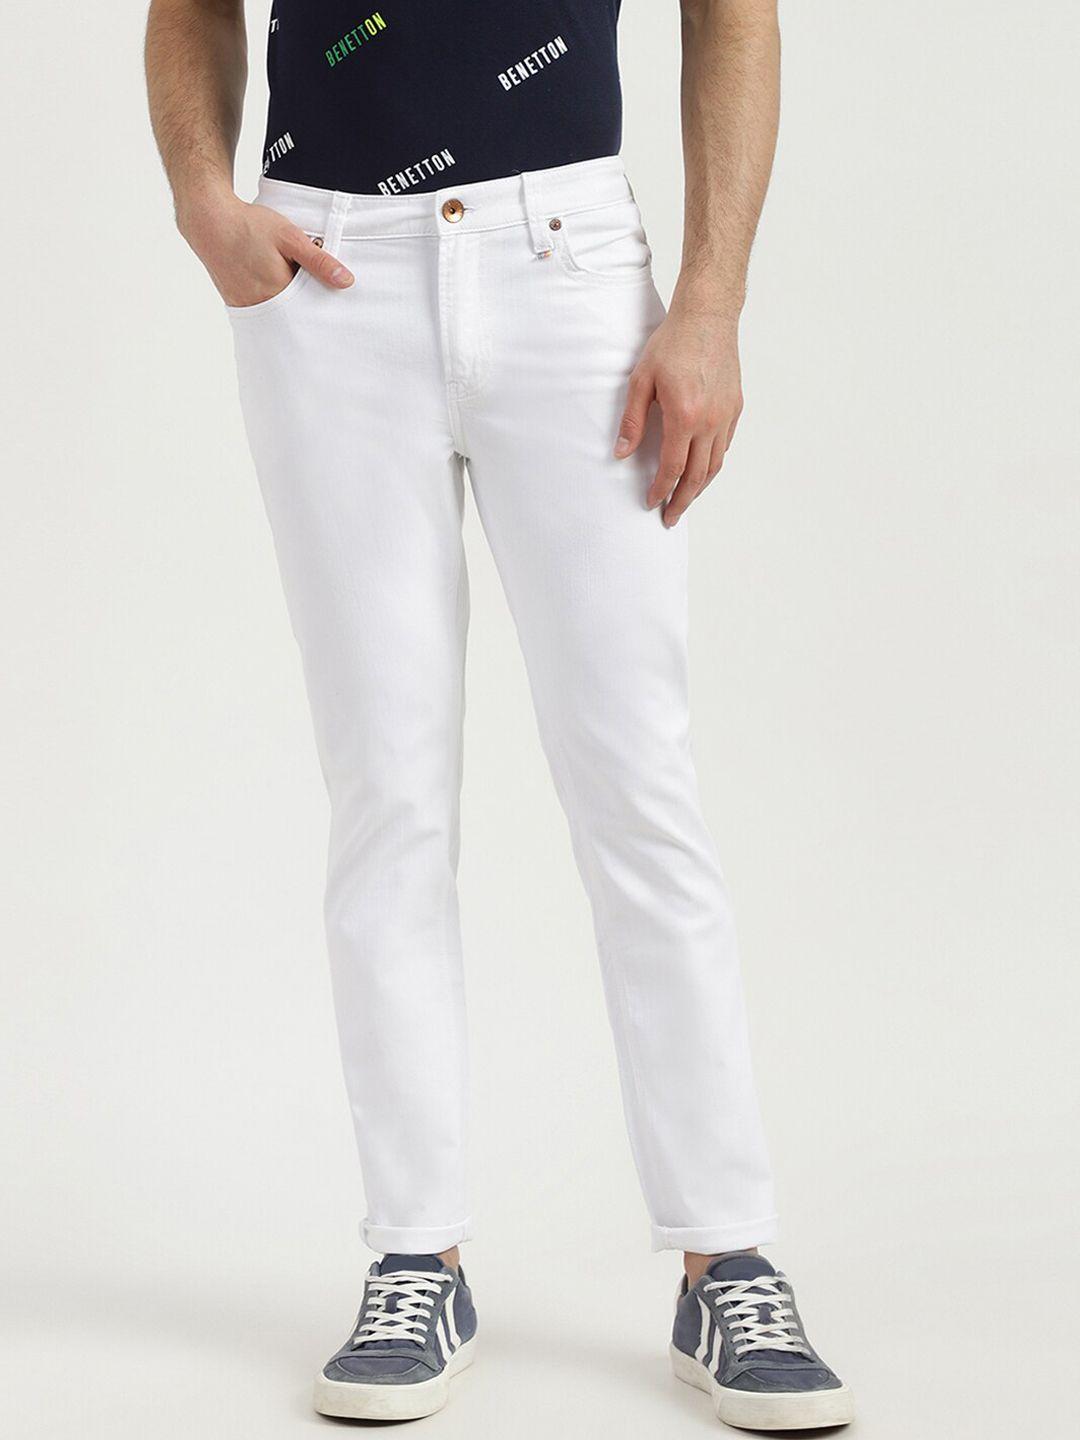 united-colors-of-benetton-men-white-cotton-skinny-fit-jeans